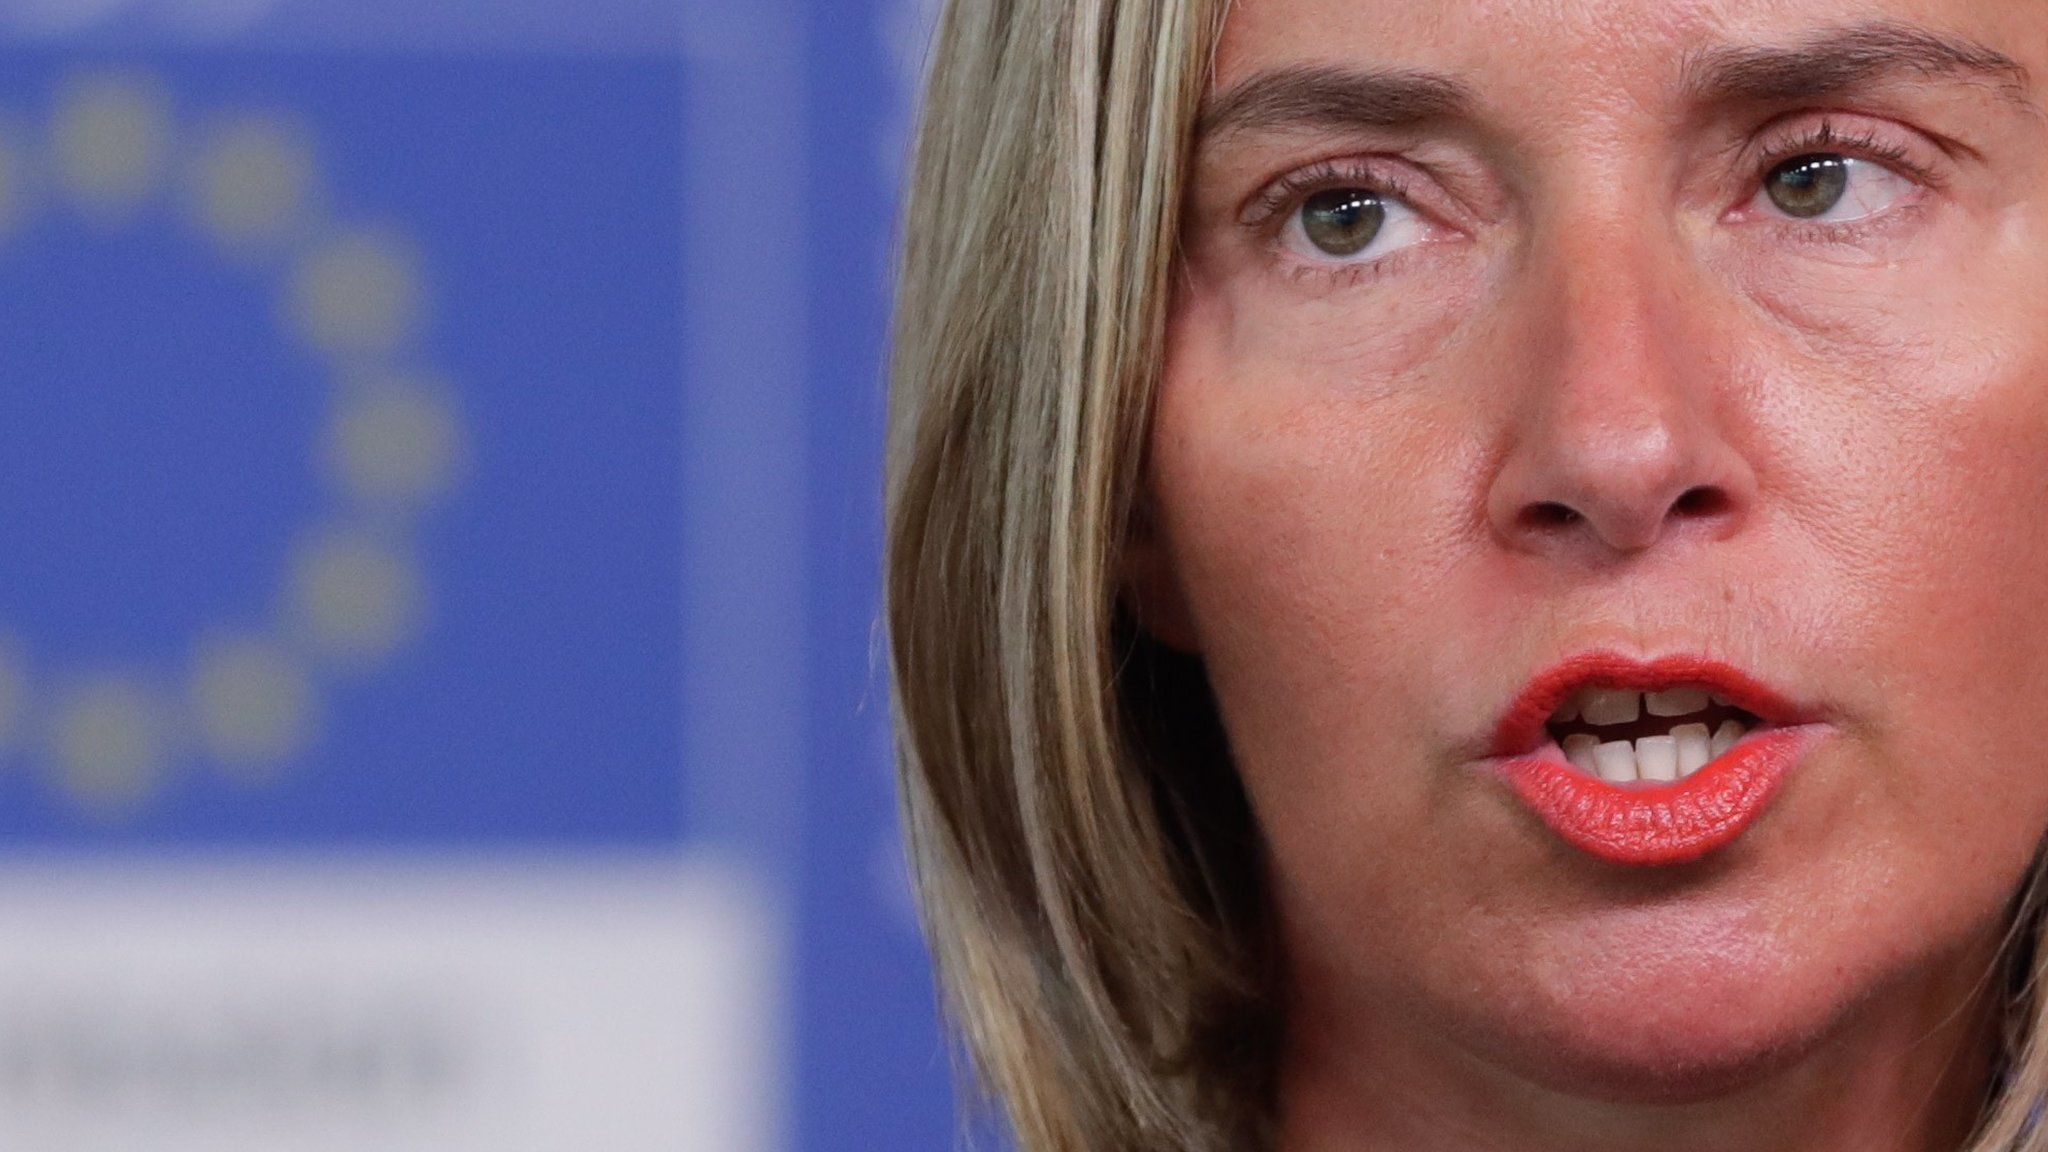 File photo showing European Union High Representative for Foreign Affairs and Security Policy Federica Mogherini speaking in Brussels (30 April 2019)